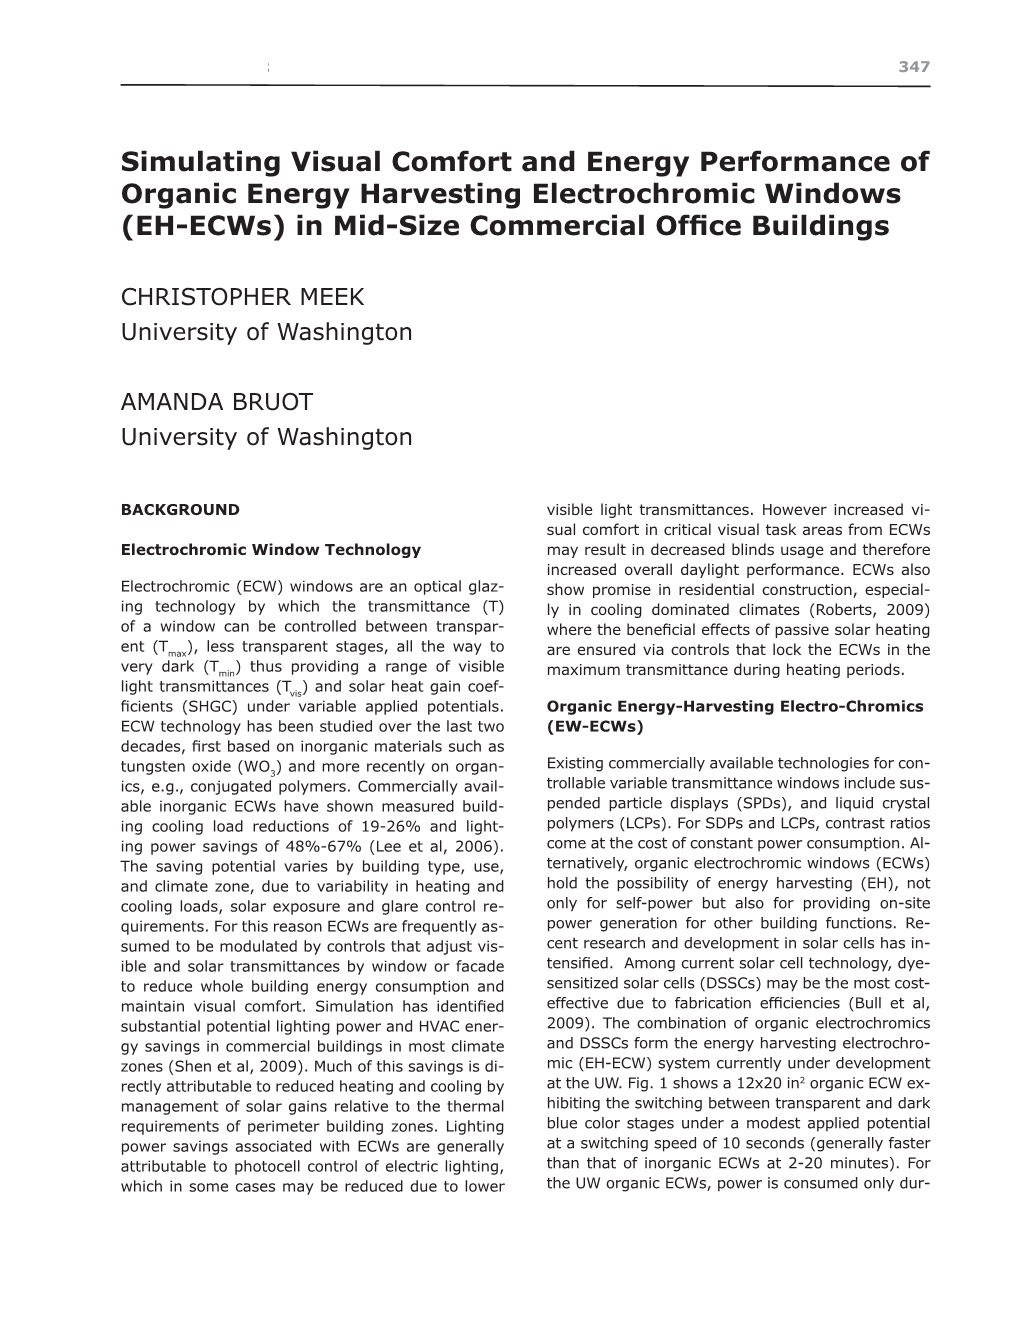 Simulating Visual Comfort and Energy Performance of Organic Energy Harvesting Electrochromic Windows (EH-Ecws) in Mid-Size Commercial Office Buildings